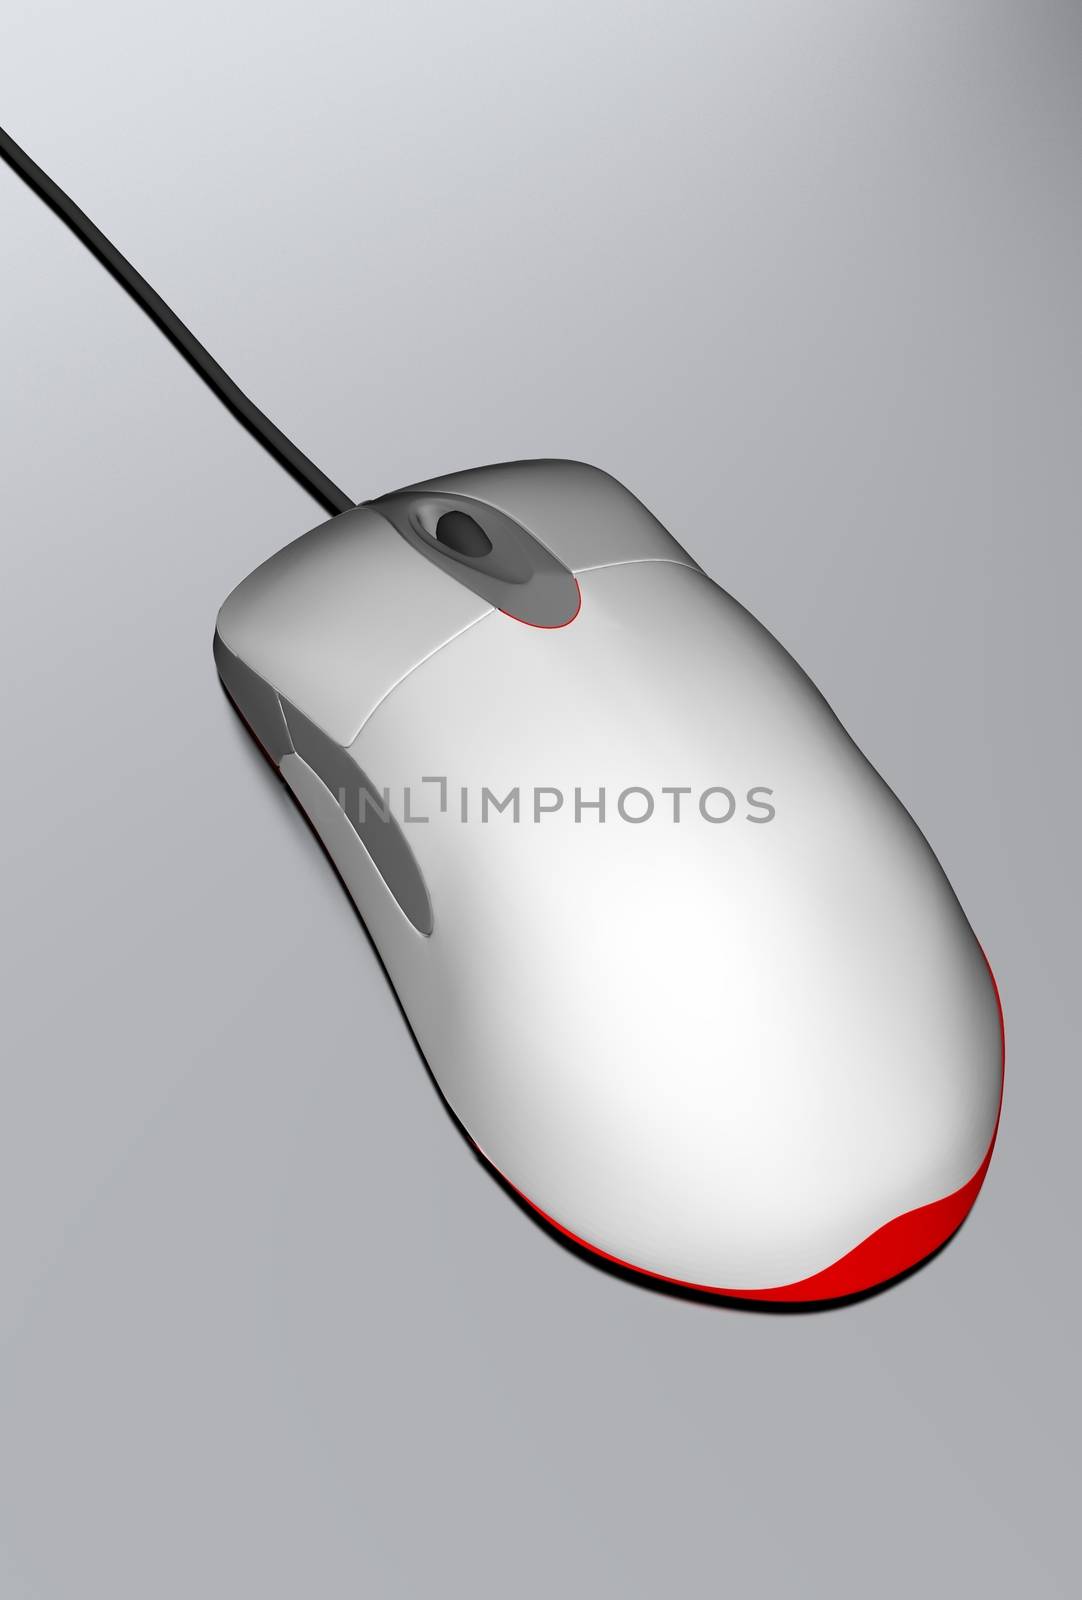 PC Mouse by welcomia